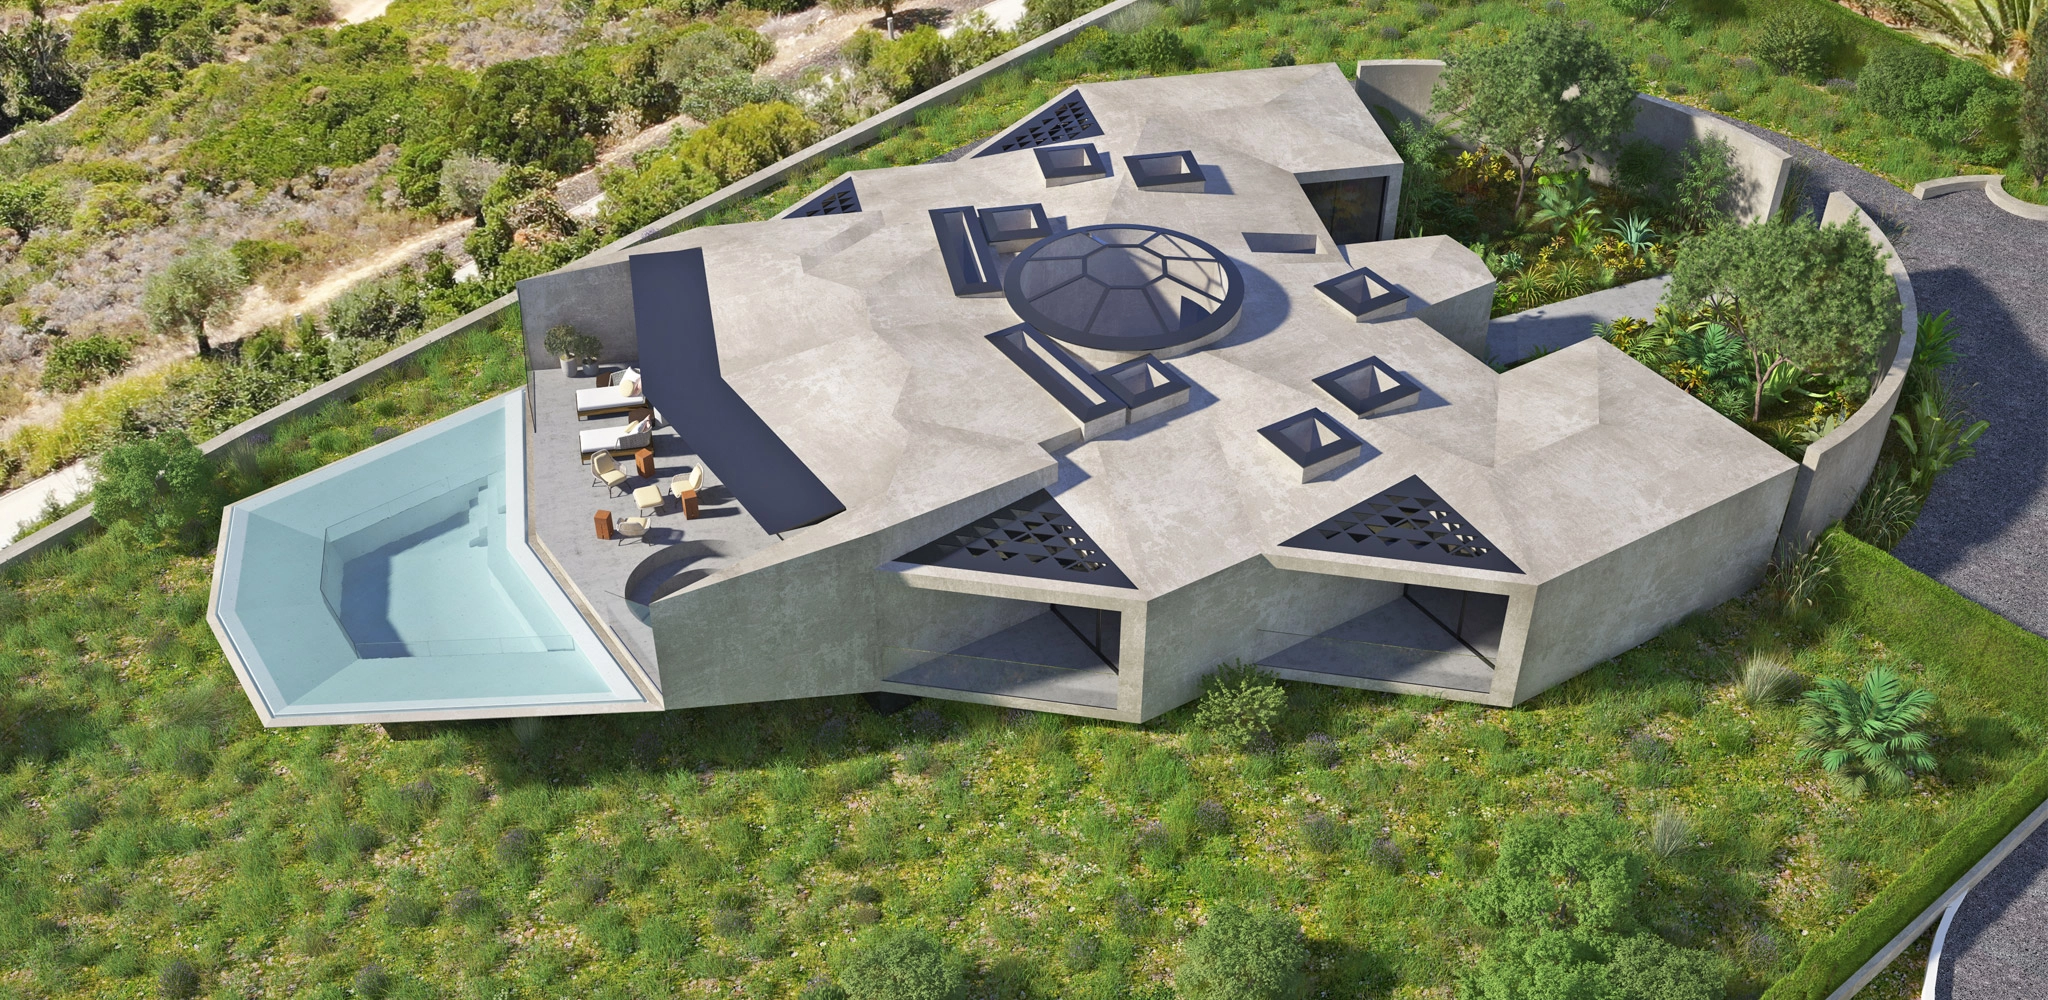 Sky Base I: A Star Wars-Inspired House in Portugal